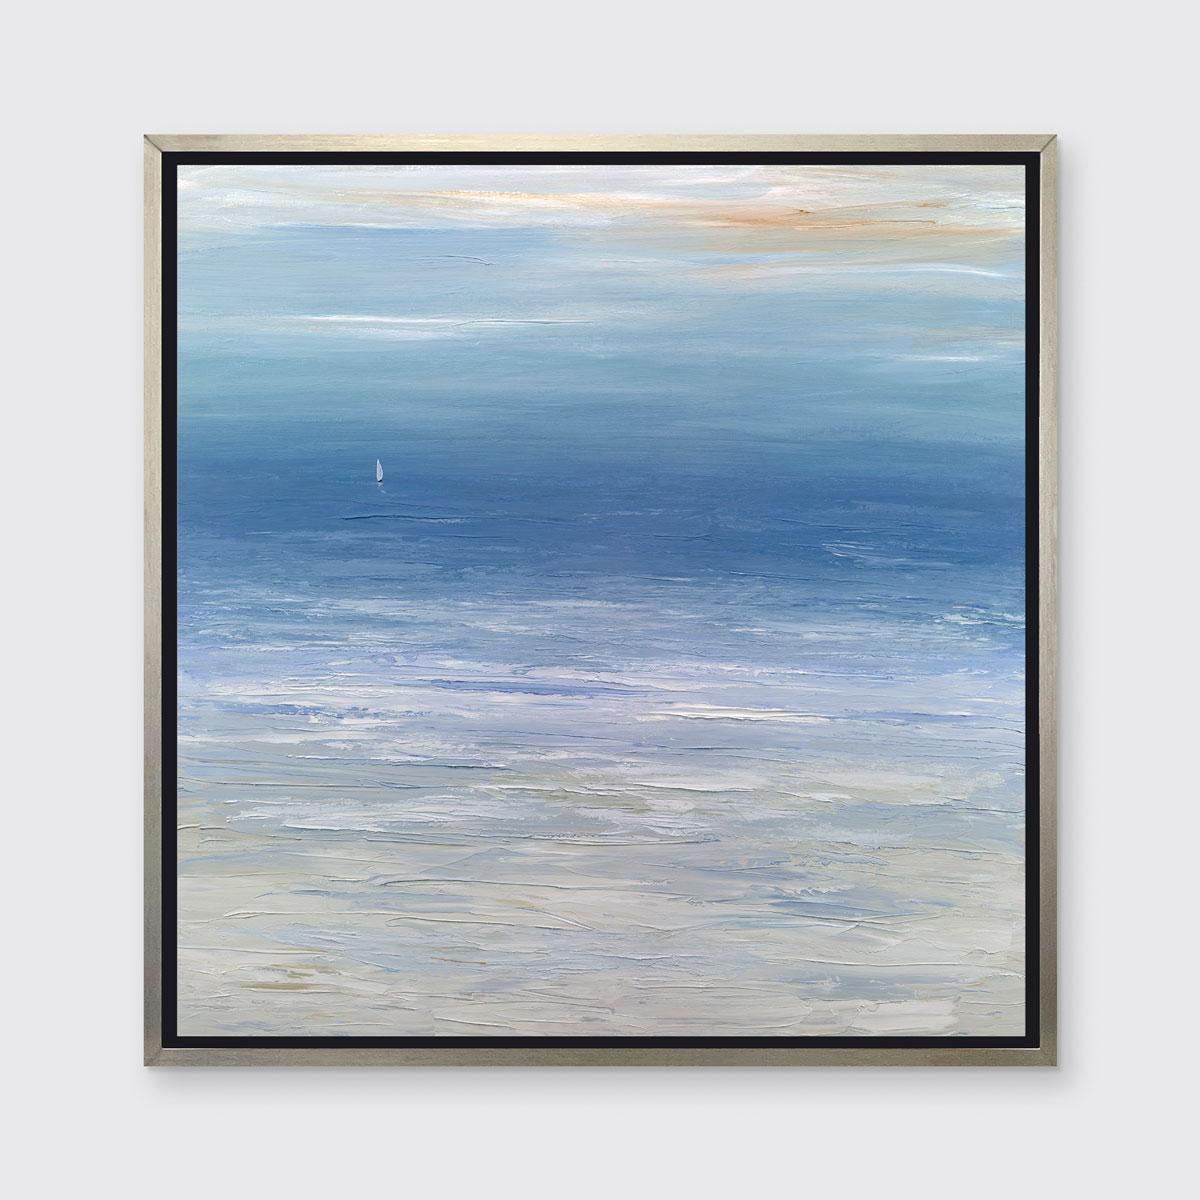 S. Cora Aldo Landscape Print - "Calm Waters II, " Framed Limited Edition Giclee Print, 24" x 24"